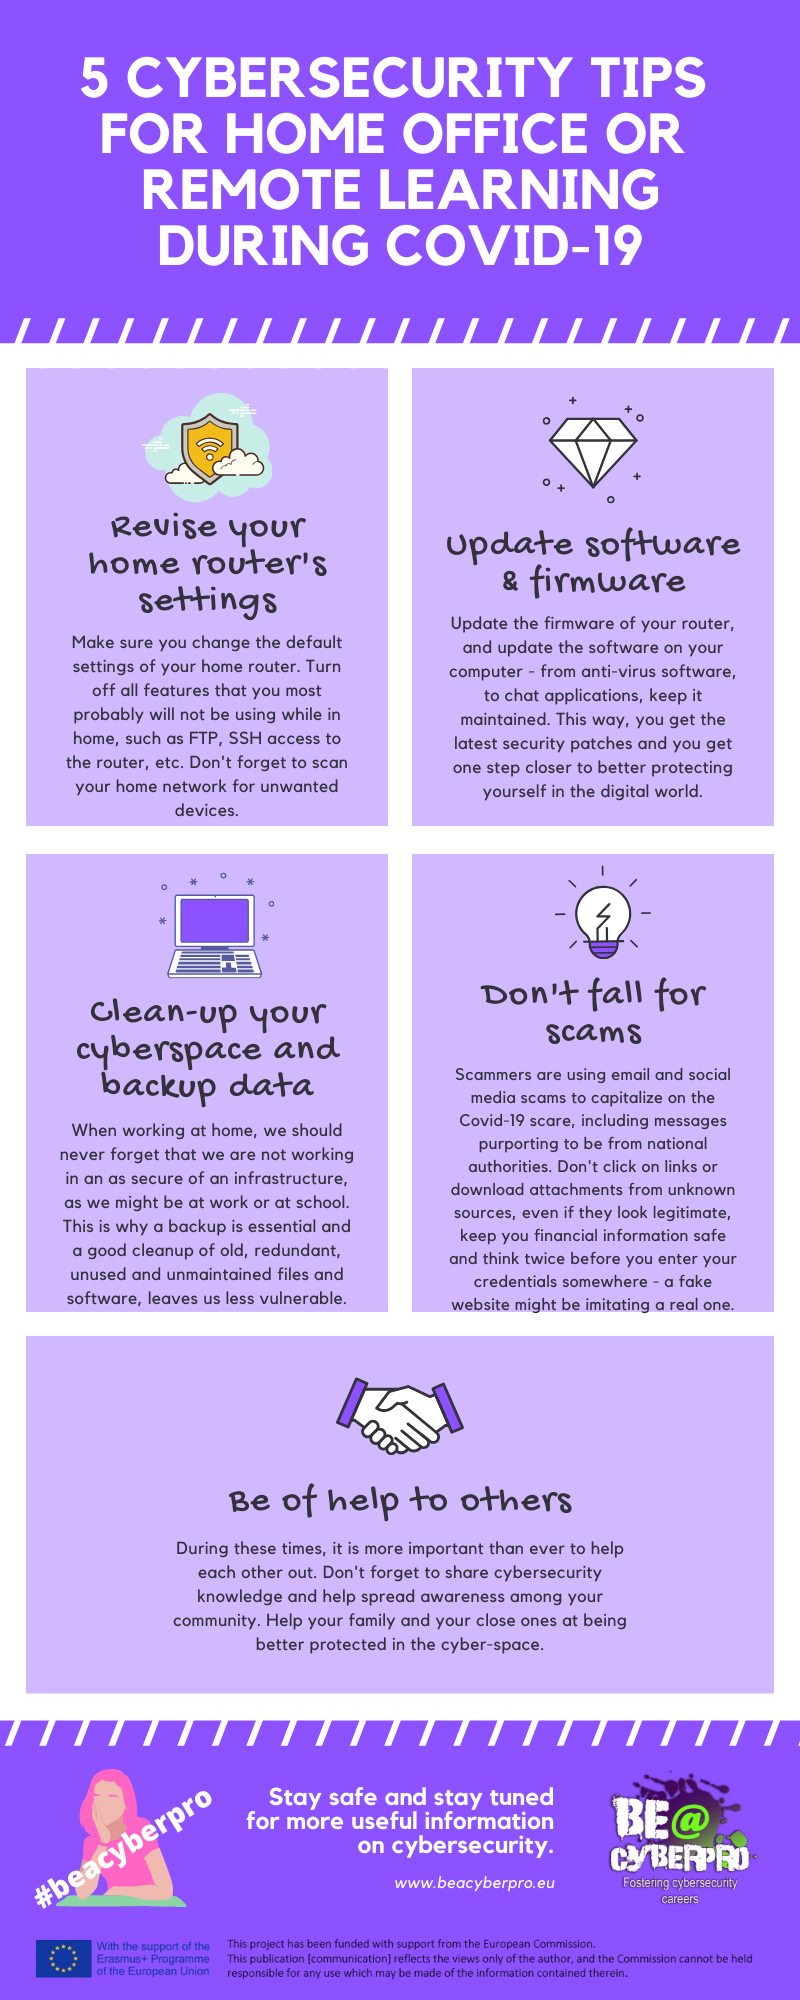 Cybersecurity Tips for Home Office or Remote Learning During the Covid-19 Crisis Infographic